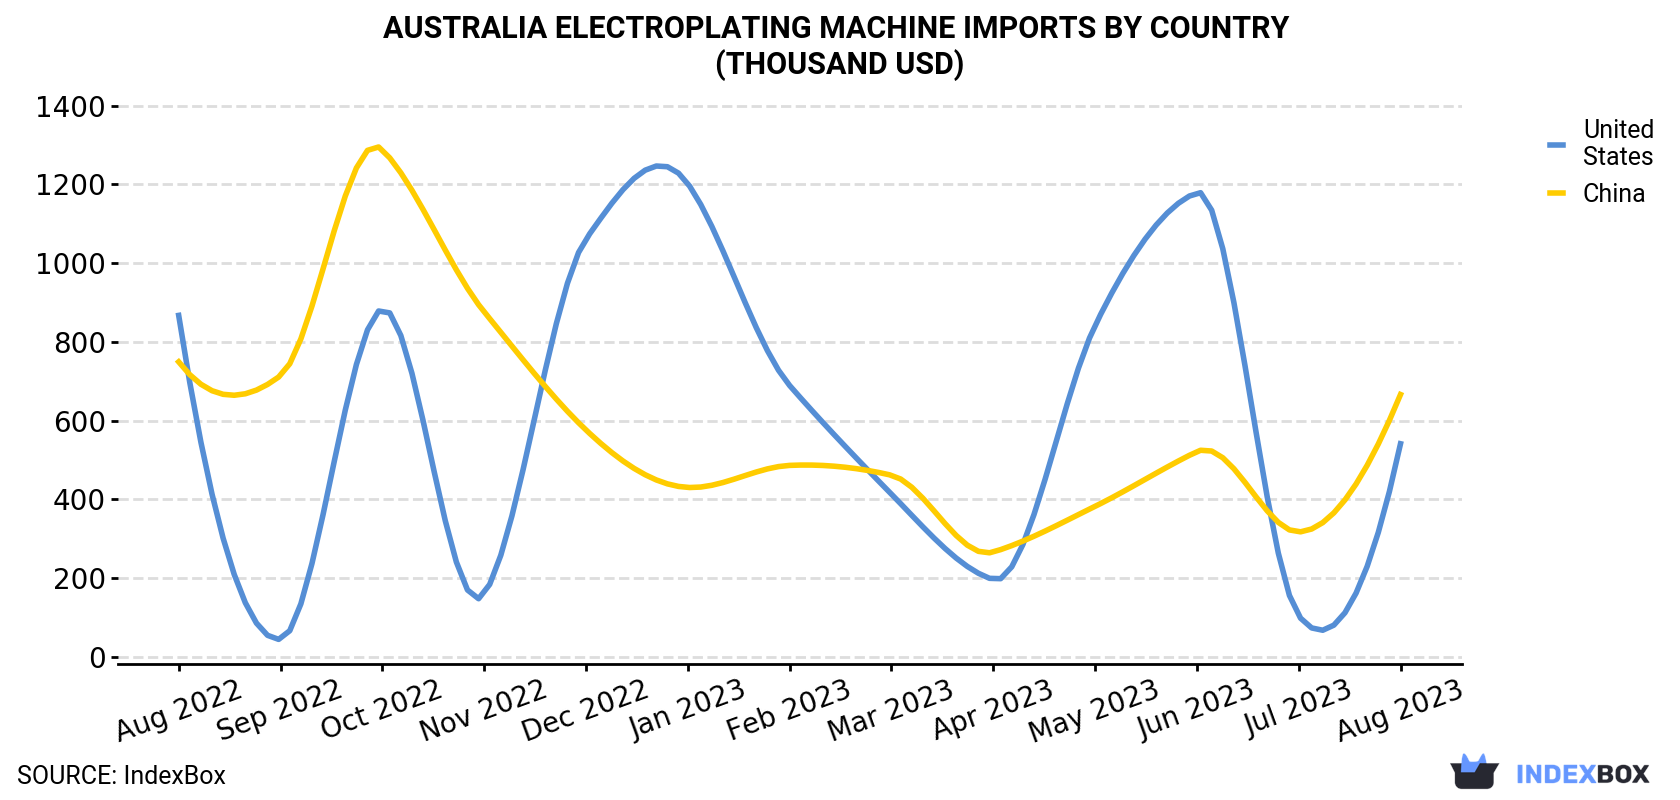 Australia Electroplating Machine Imports By Country (Thousand USD)